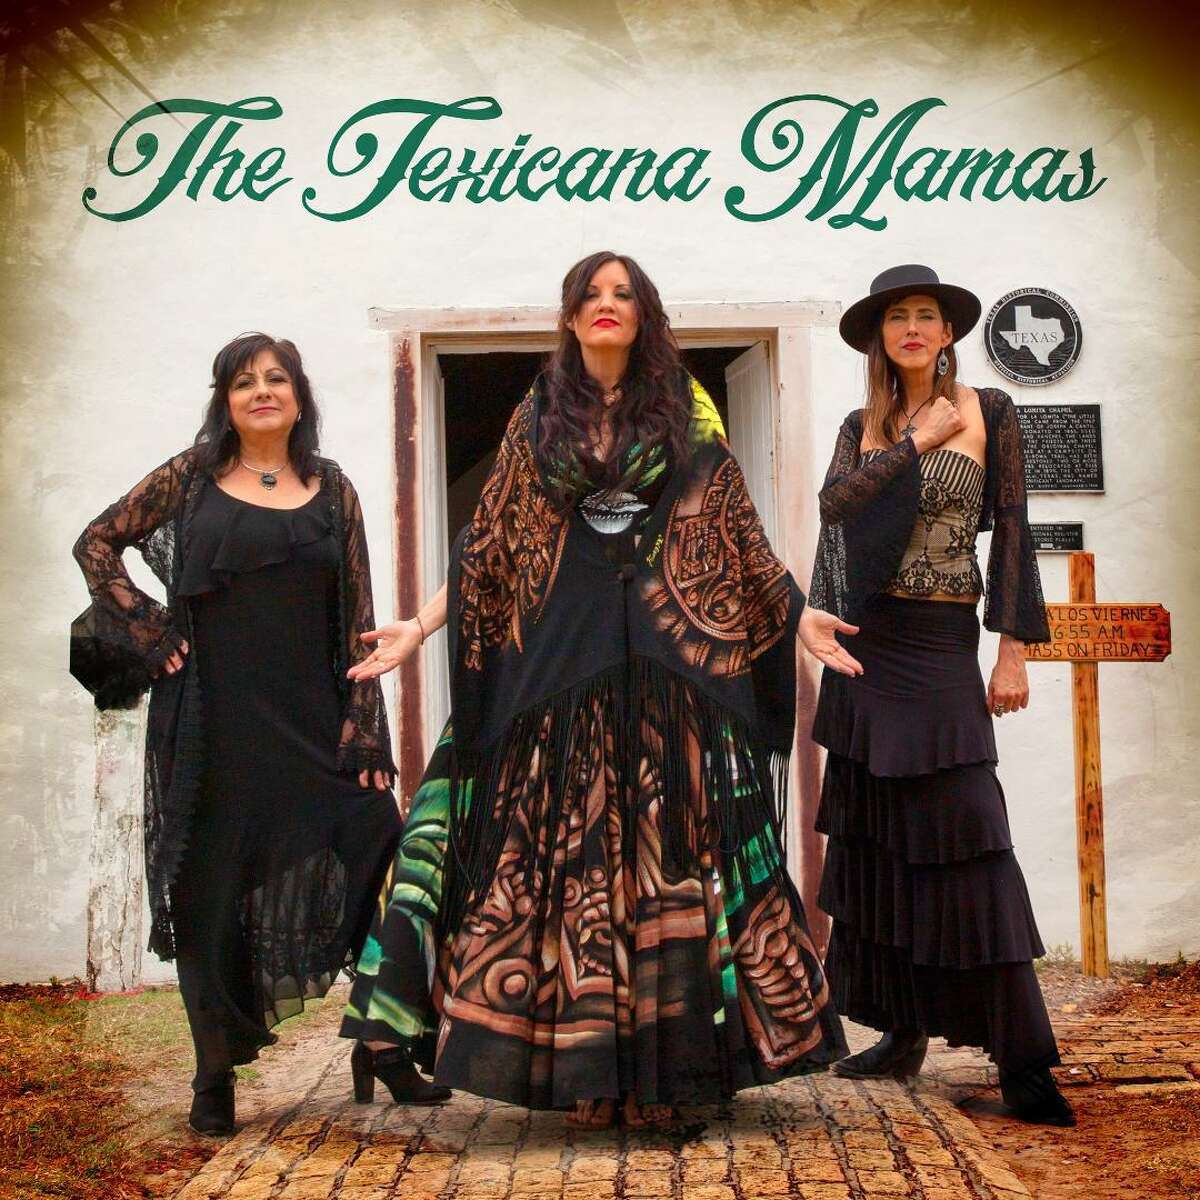 The premier album of The Texicana Mamas will drop Aug. 21.